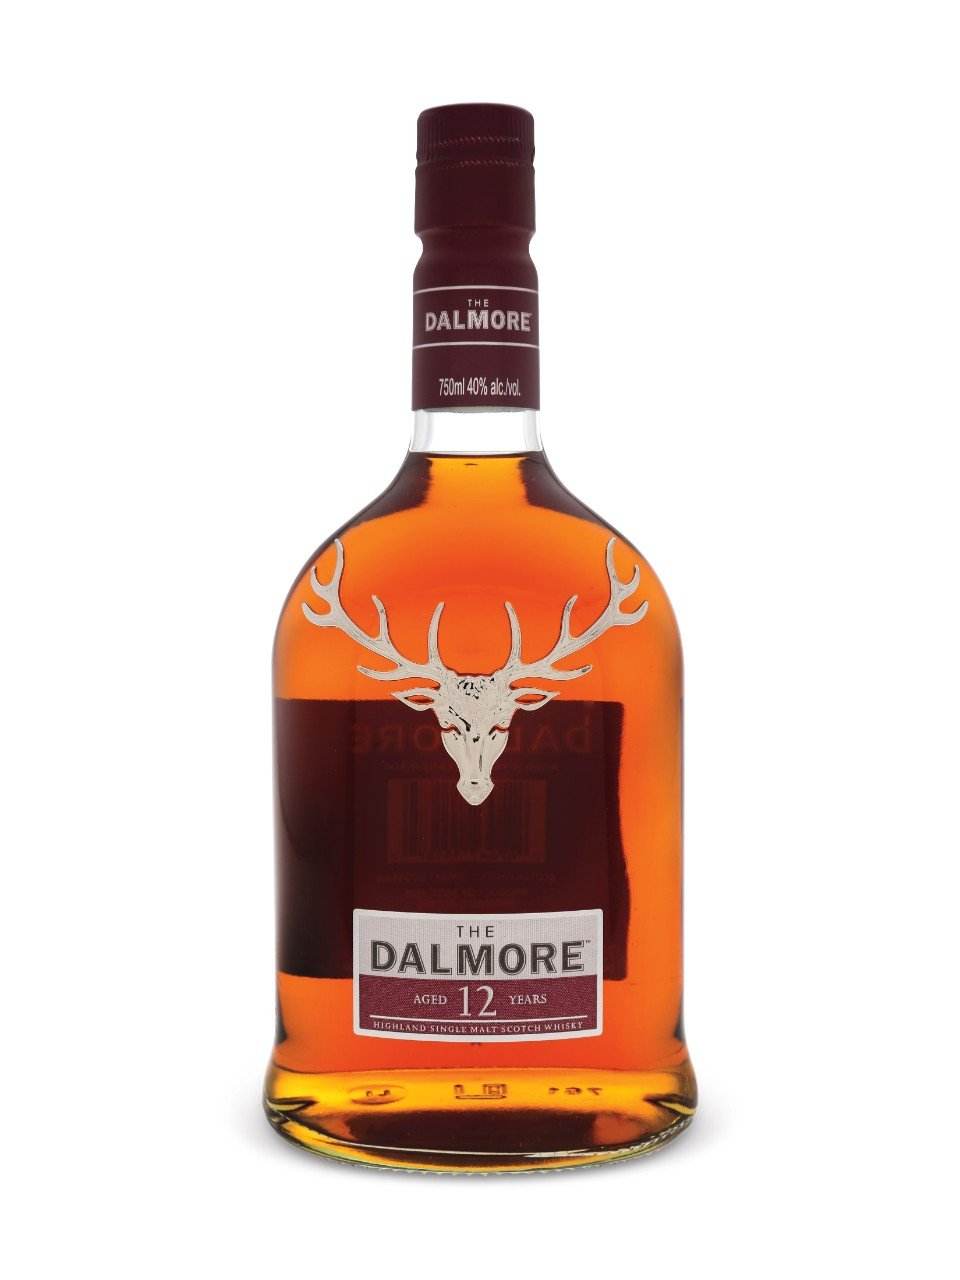 The Dalmore 12 Year Old Highland Single Malt Scotch Whisky | Exquisite Wine & Alcohol Gift Delivery Toronto Canada | Vyno